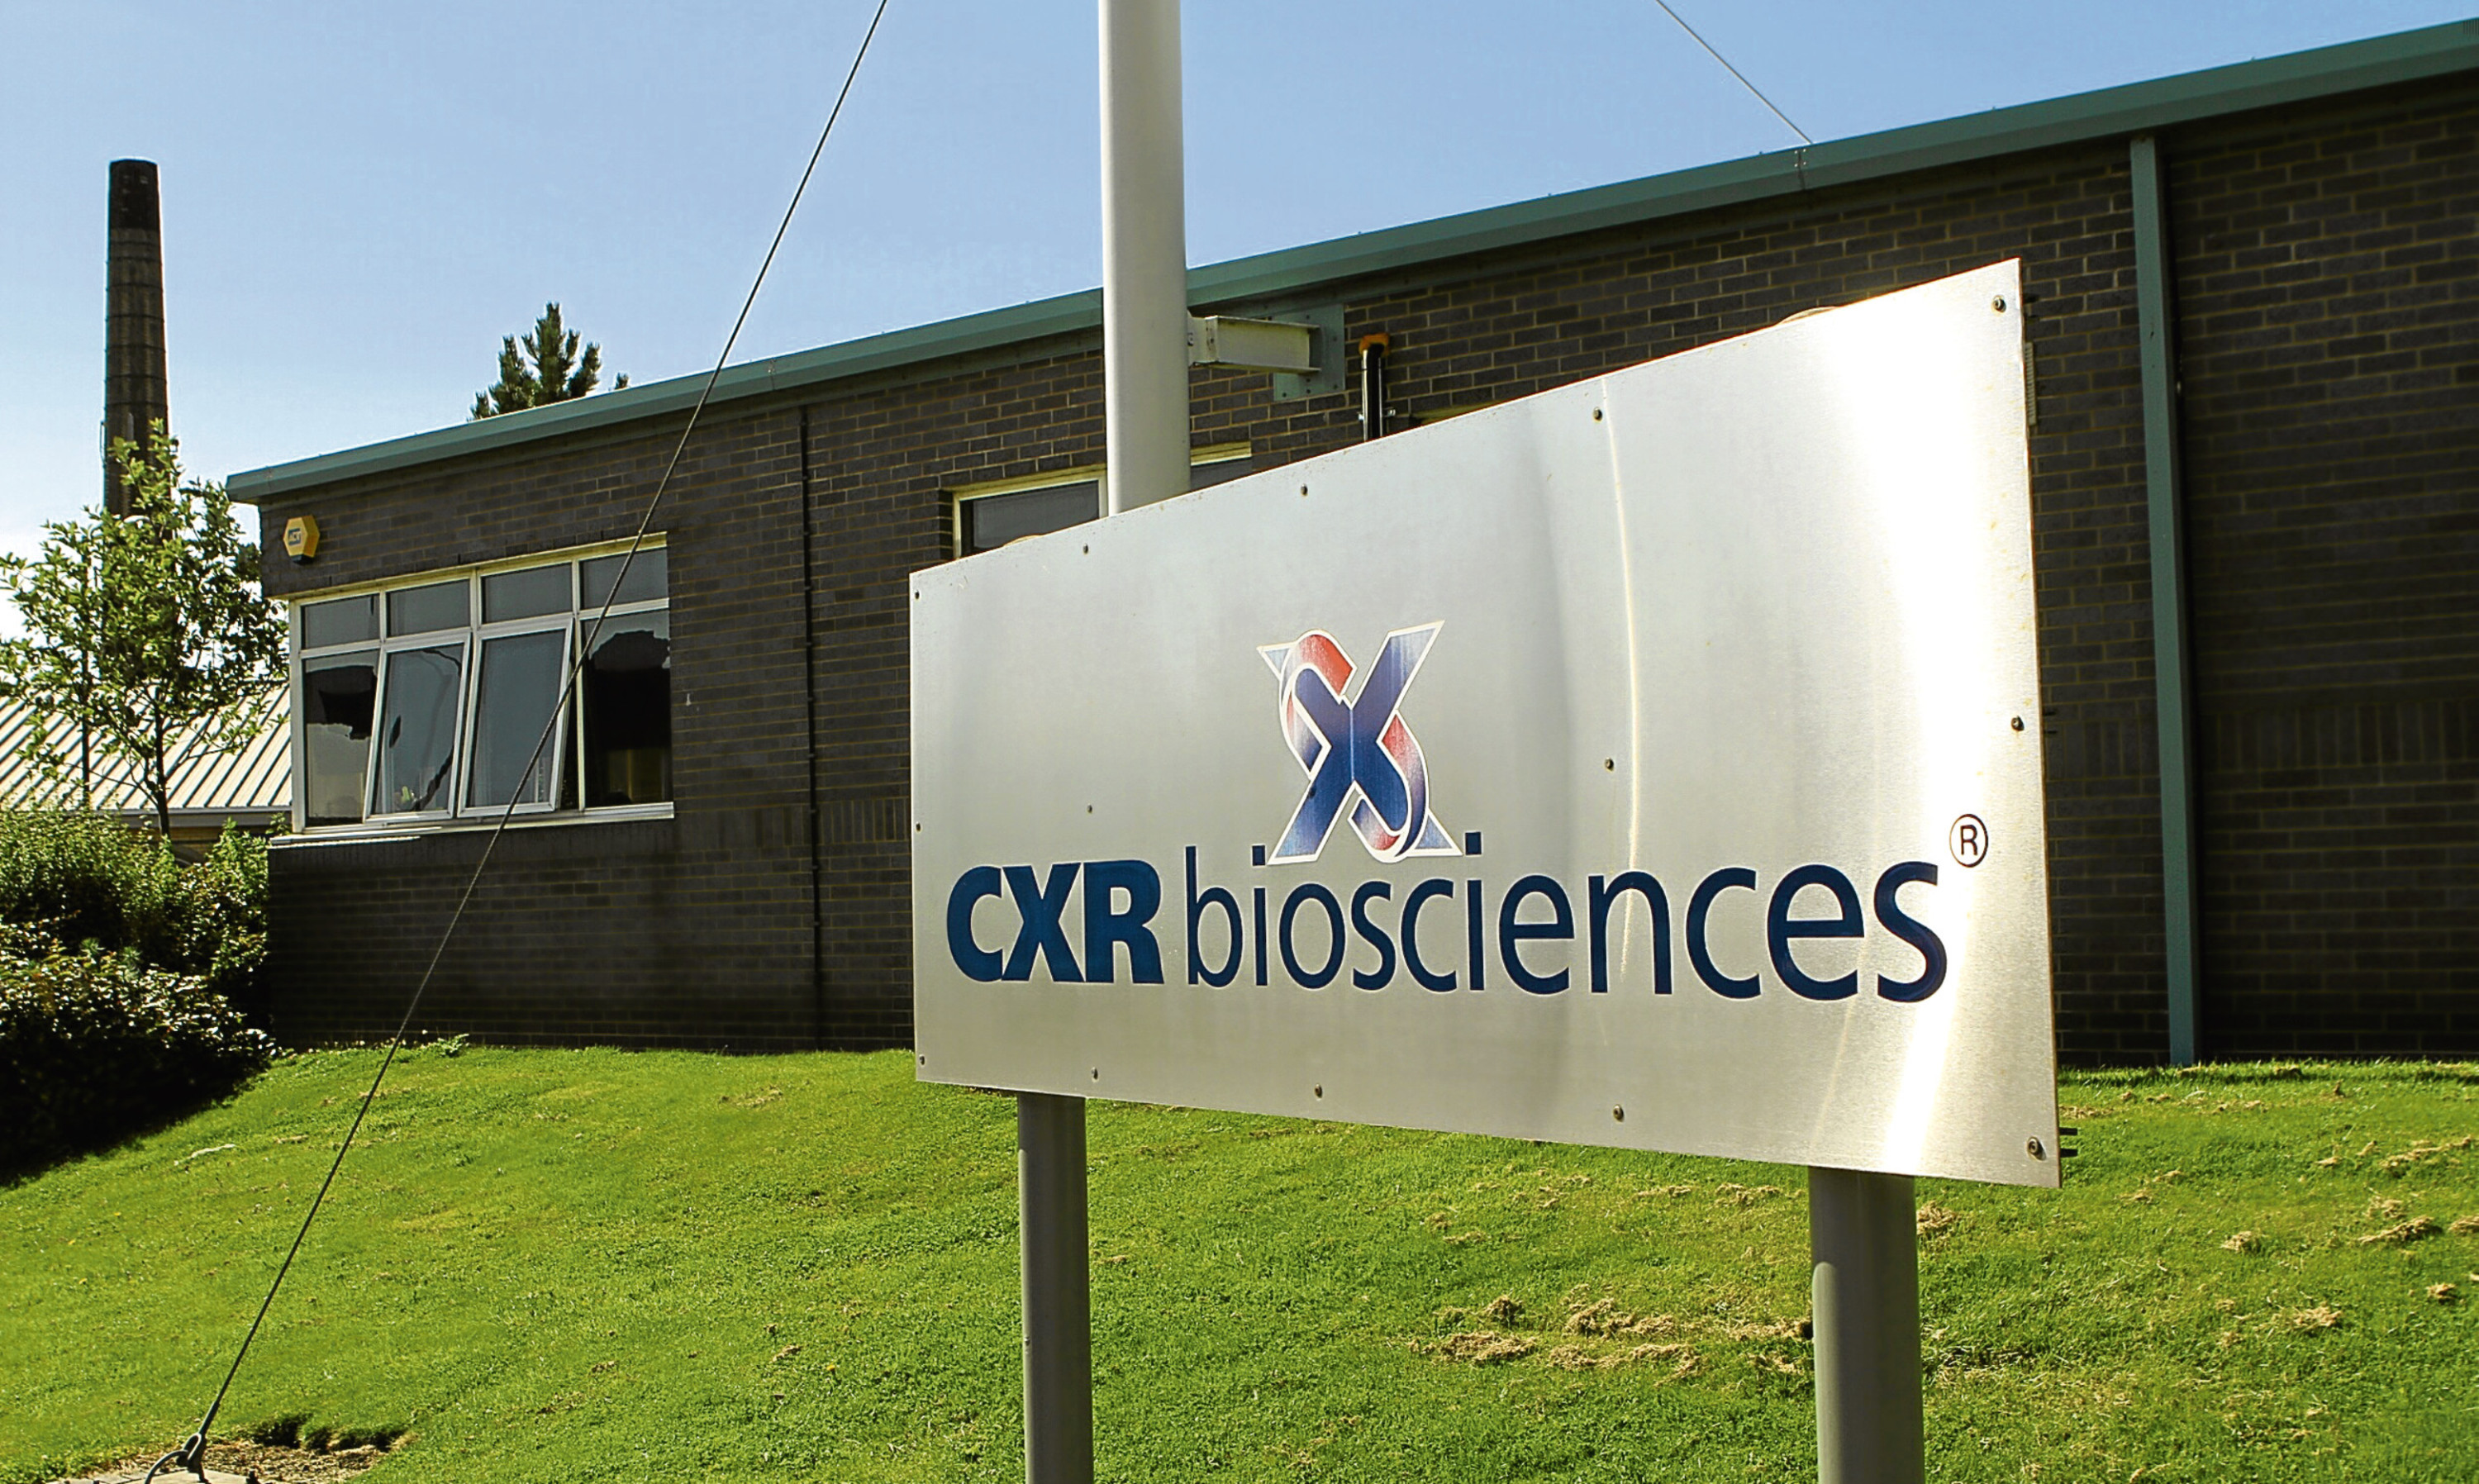 The CXR biosciences name is being dropped as the wider group is rebranded under a new identity of Concept Life Sciences Group